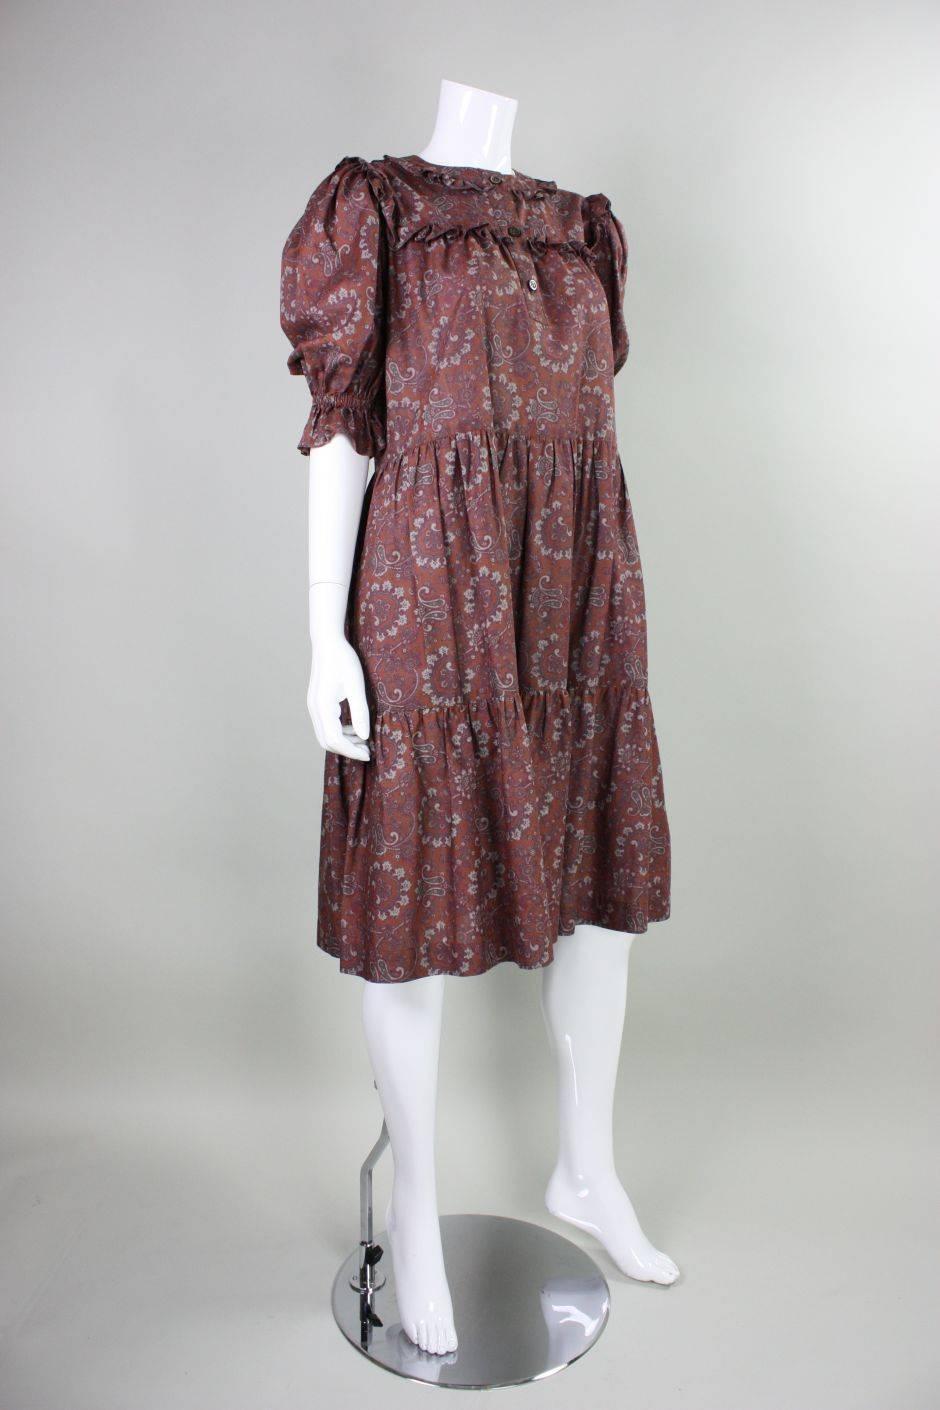 Vintage dress from Yves Saint Laurent Rive Gauche label dates to the early to mid-1980's and is made of rust orange cotton with a paisley pattern.  Center front button closure.  Unlined. Labeled size 34.  
Please note that even though the bust